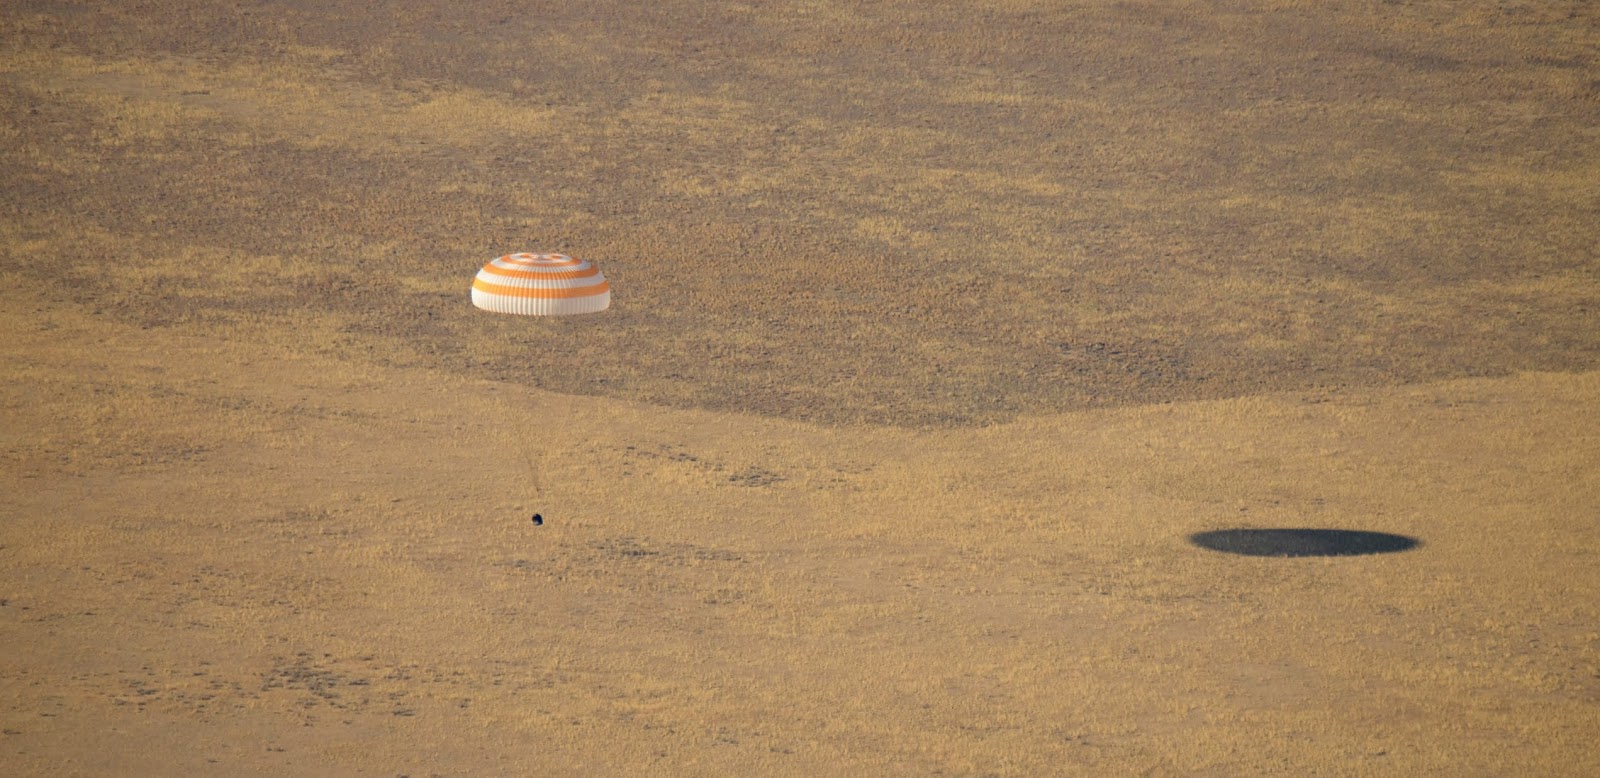 Multinational Soyuz Crew Returns Safely to Earth after Departing ISS